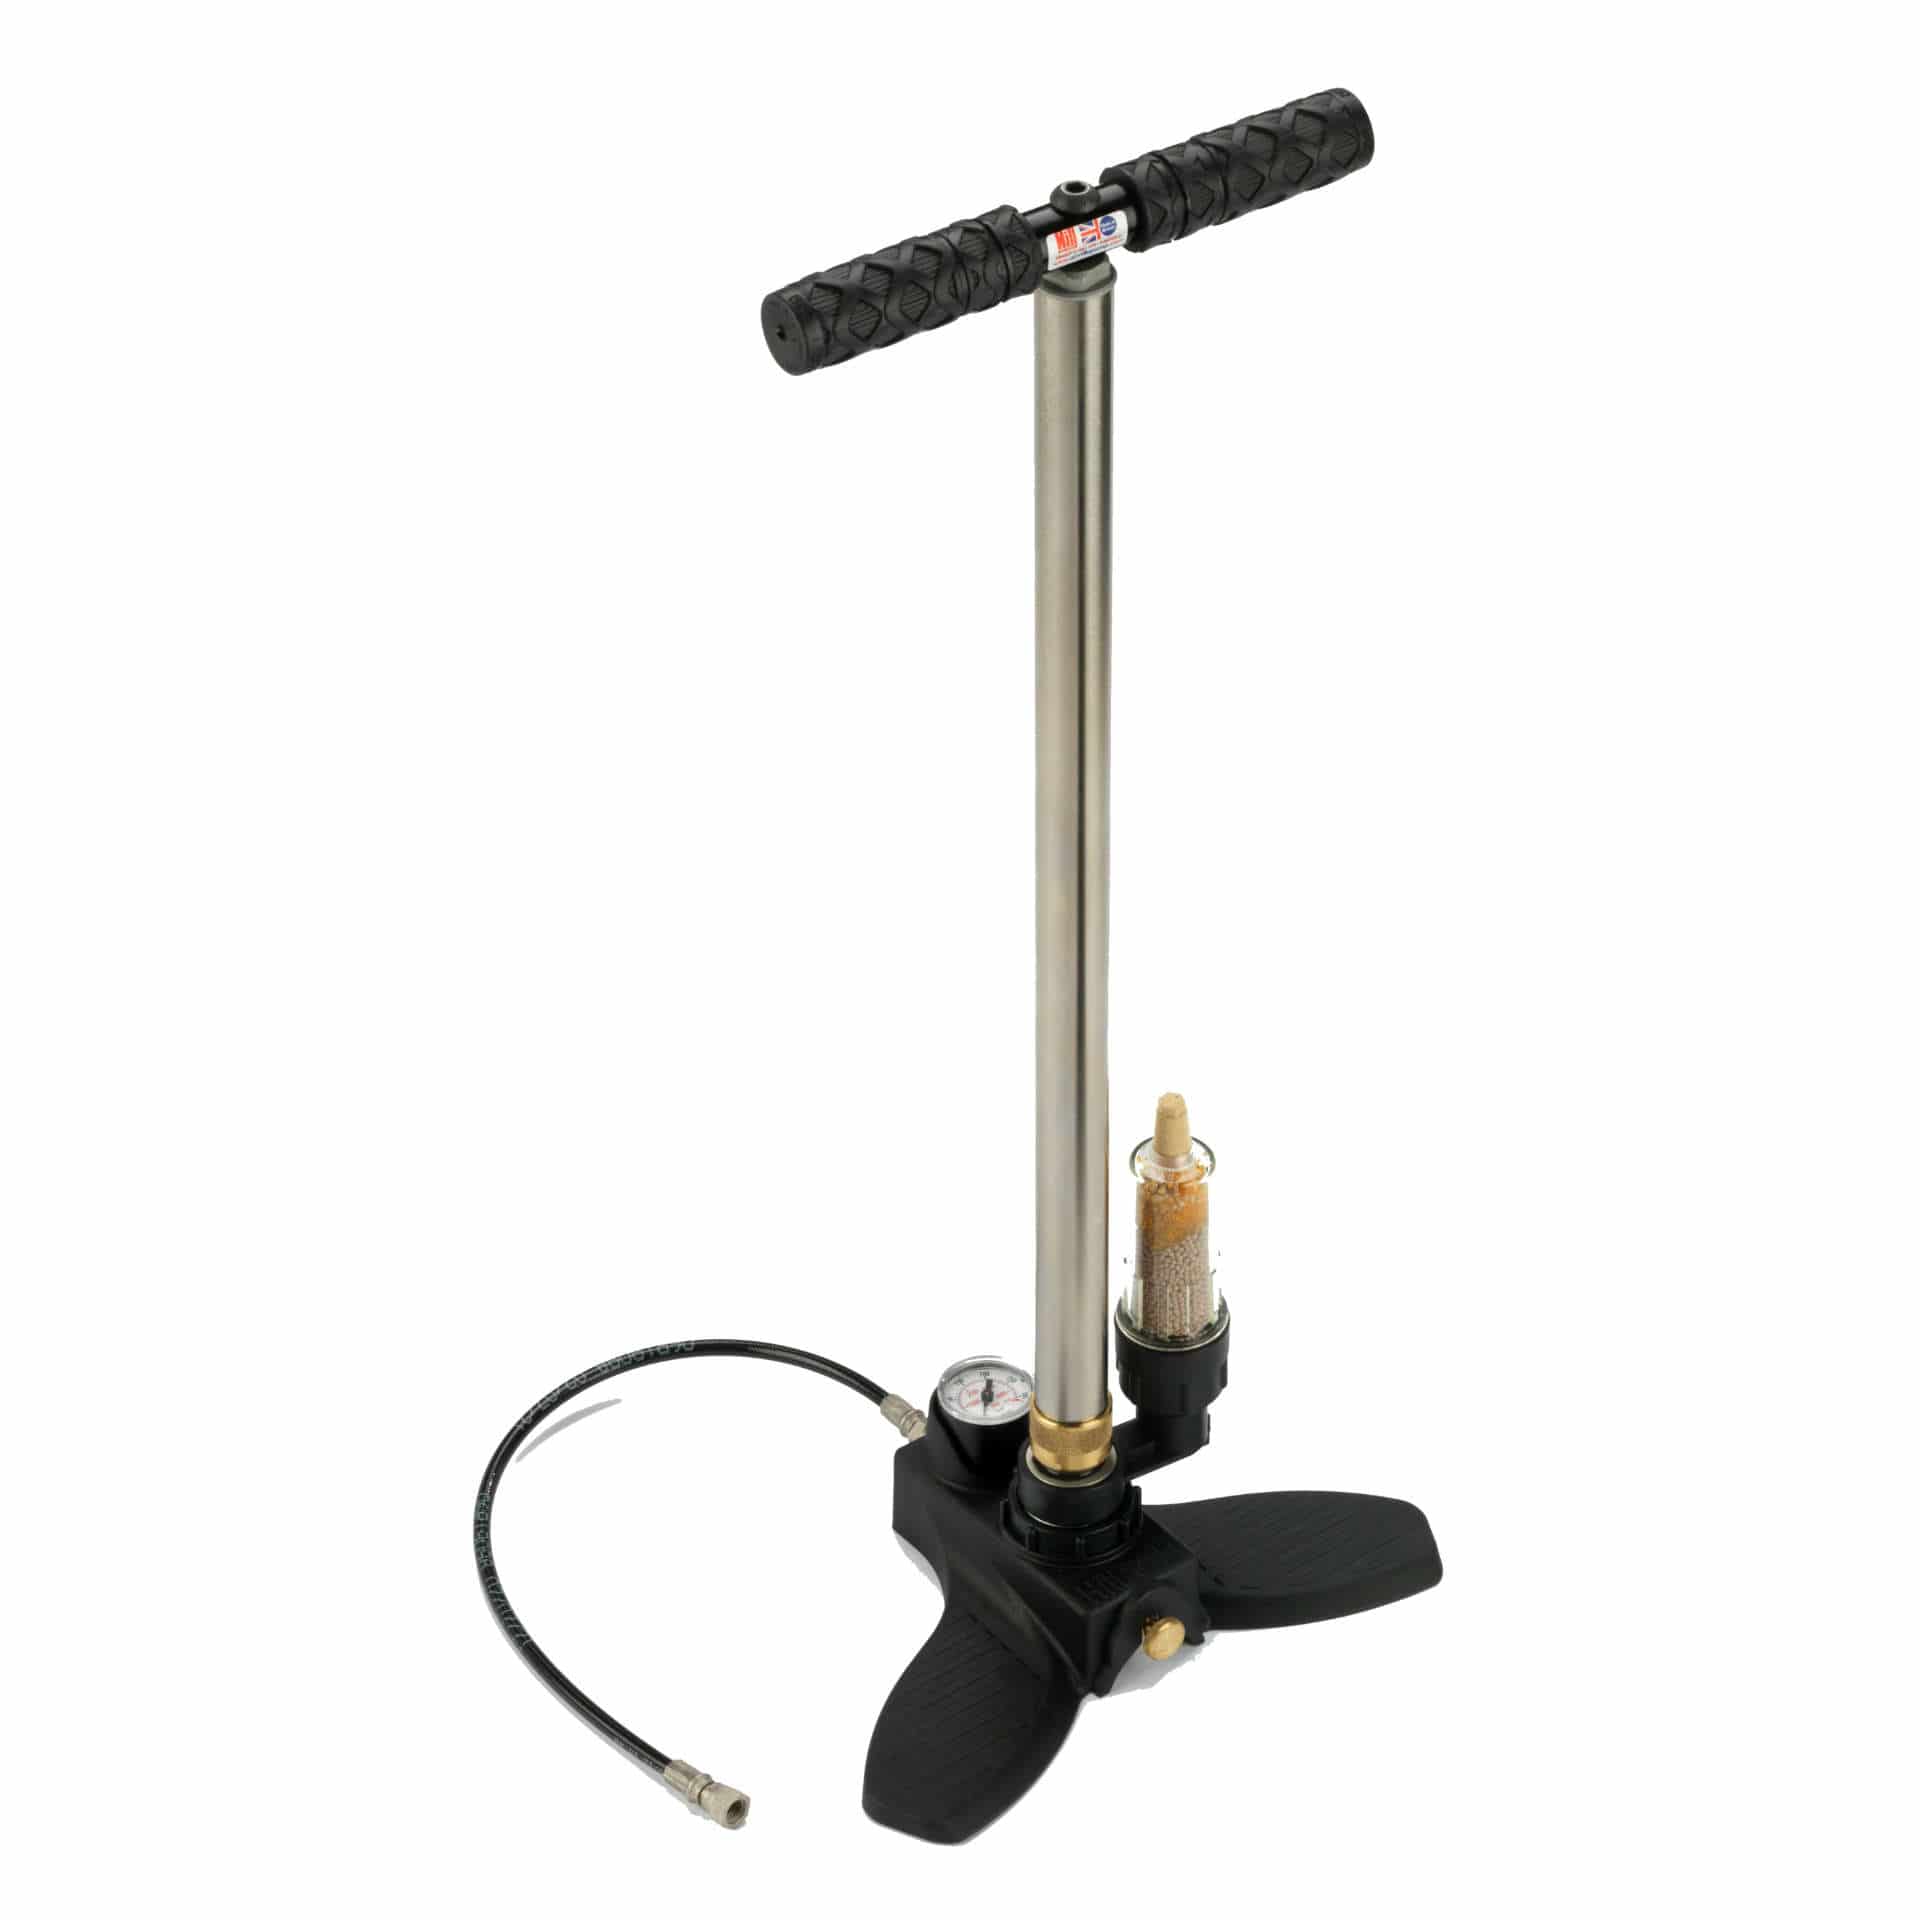 Hand pump MK5 with 1/8 "BSP connection and dry filter